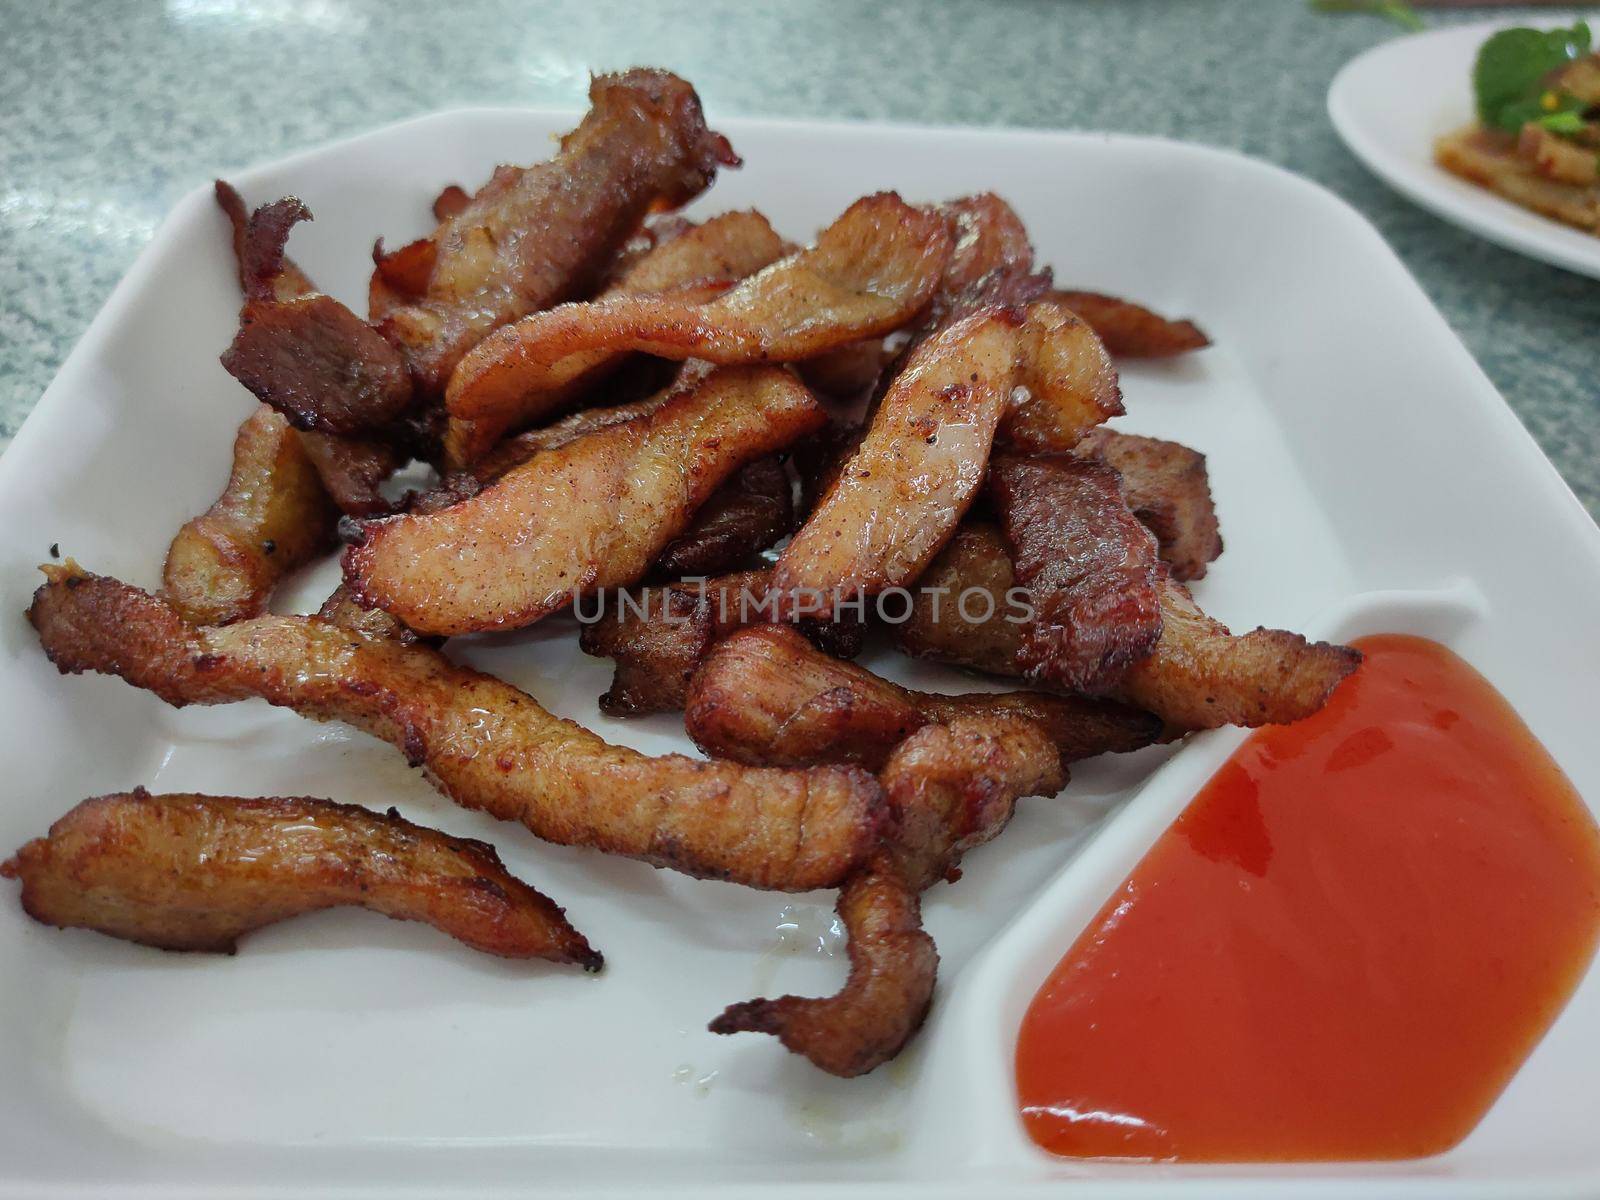 The Food deep fried dried pork. Local appetizer food in Thailand for breakfast or lunch.